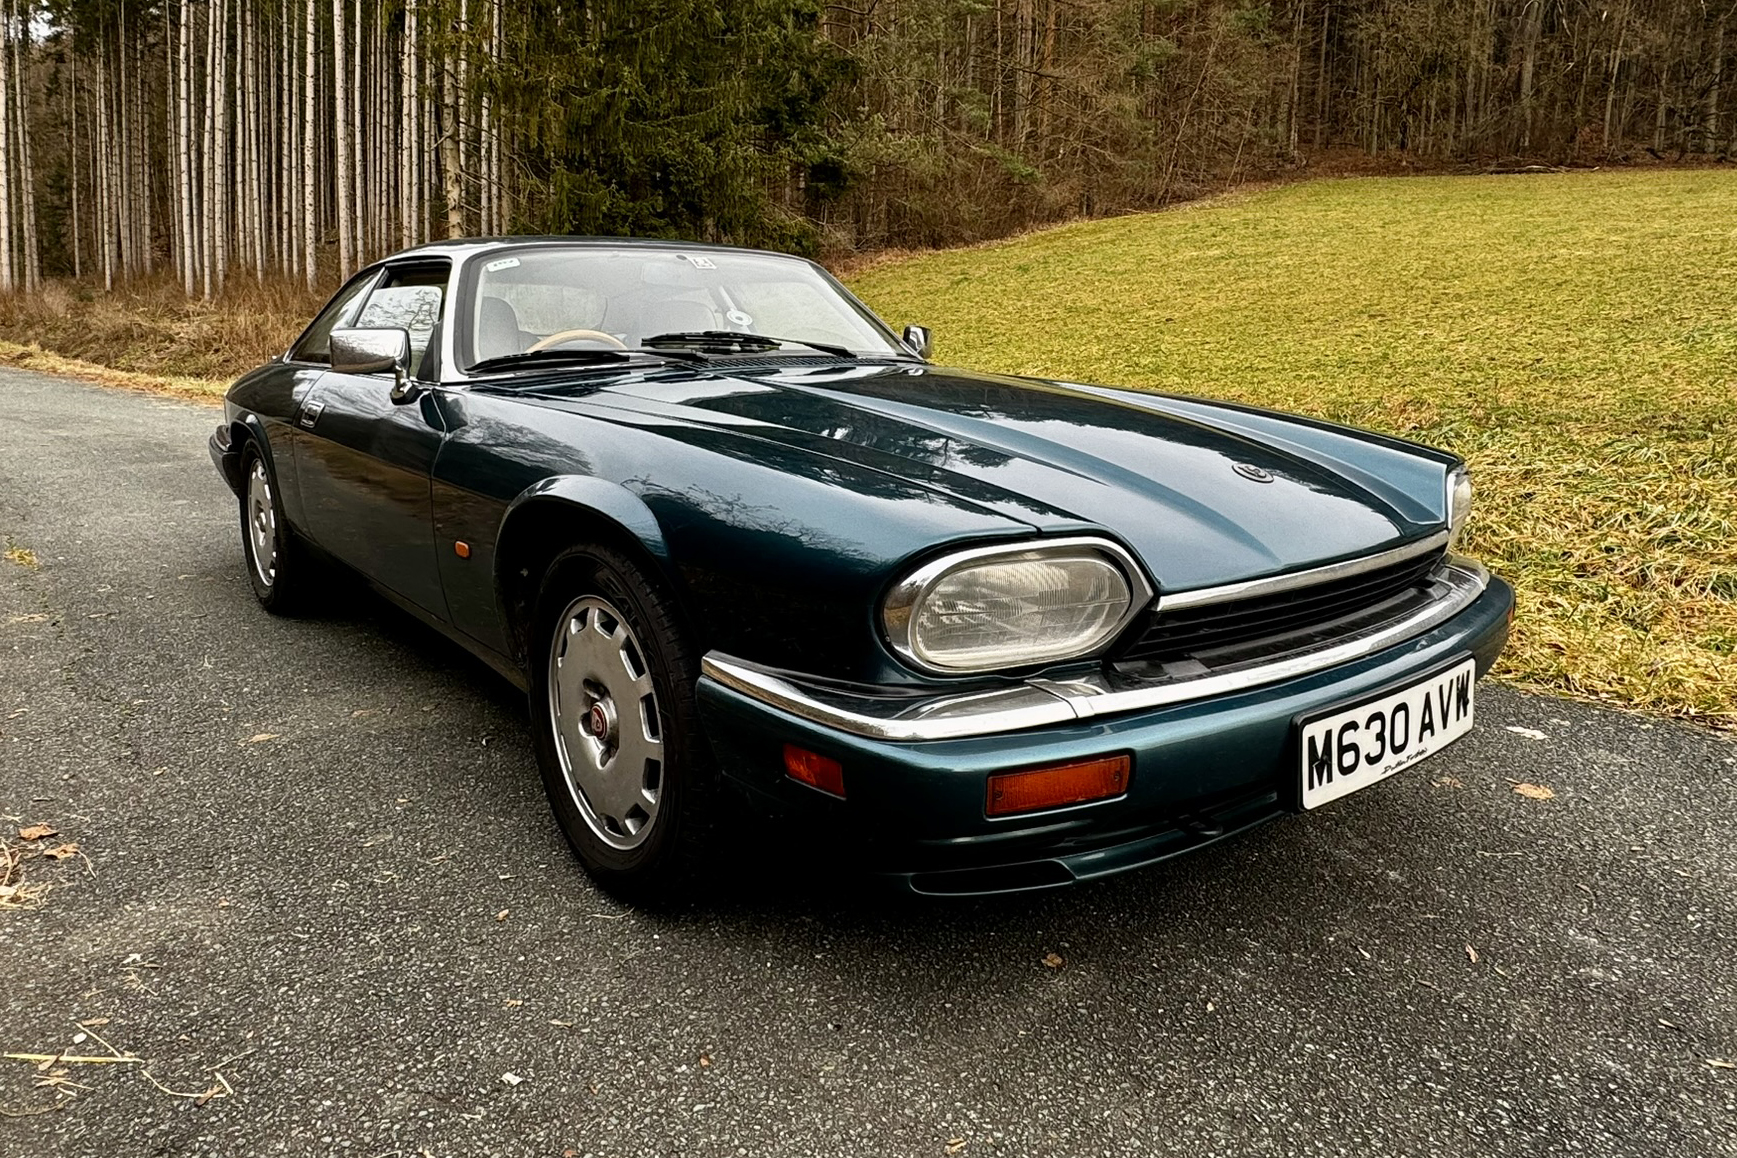 1995 Jaguar XJS 4.0 Coupe for sale by classified listing privately in 